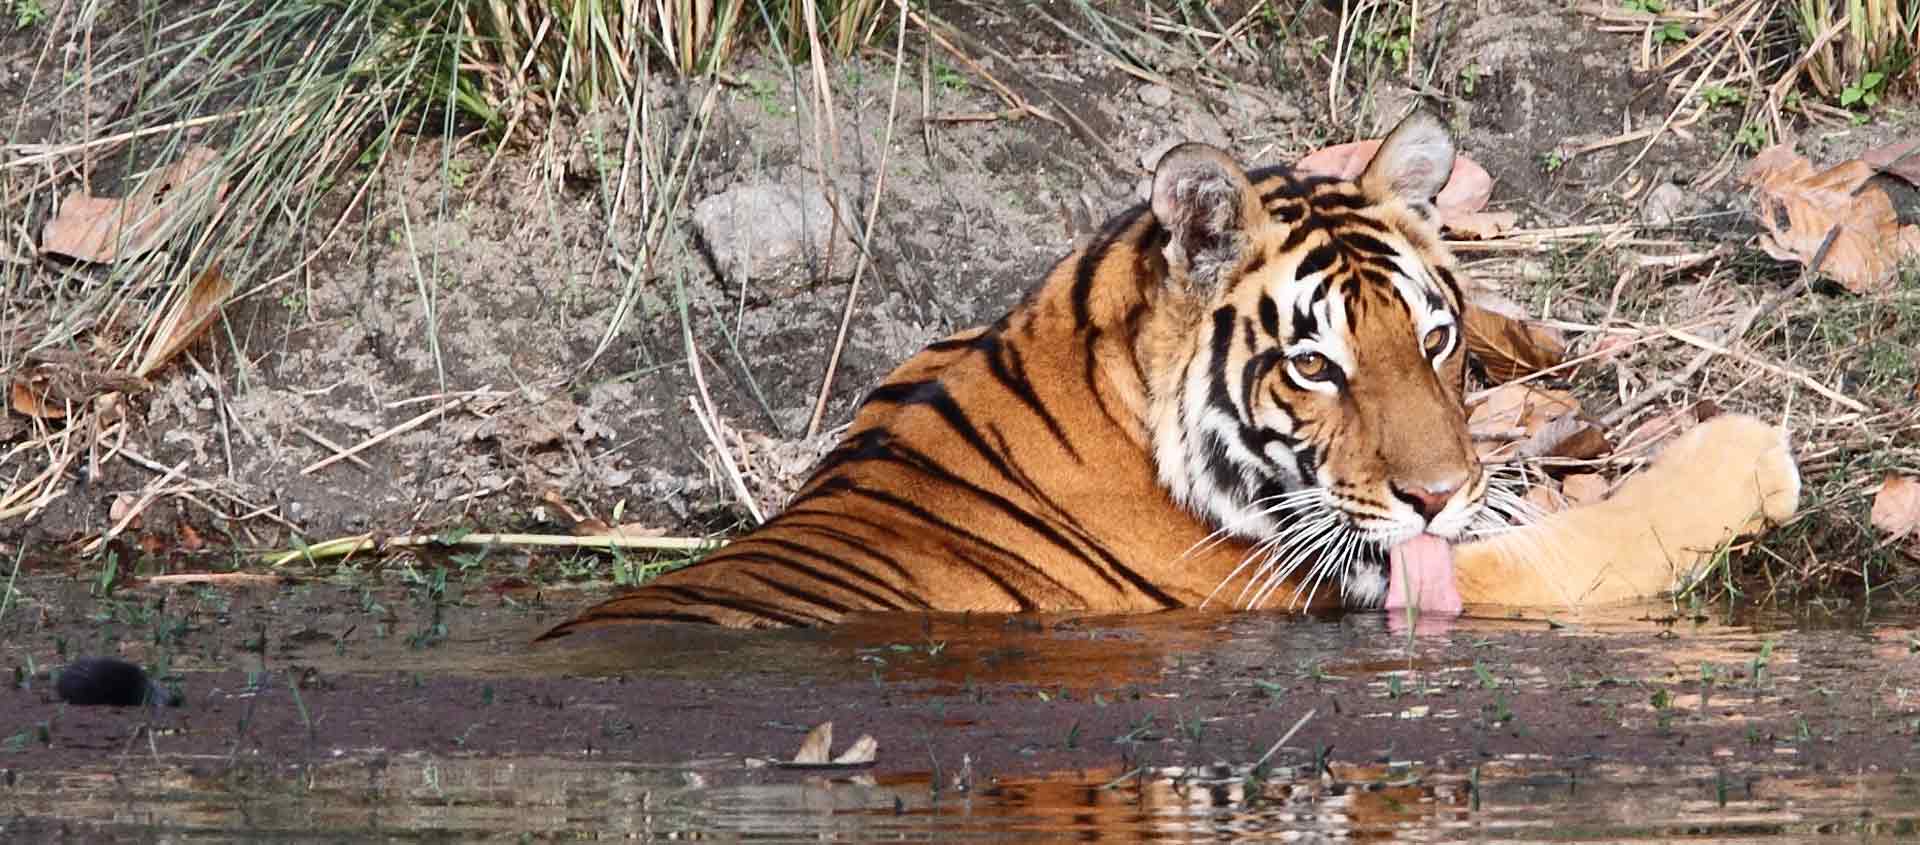 Tigers and Snow Leopards Safari photo of a Bengal Tiger in water